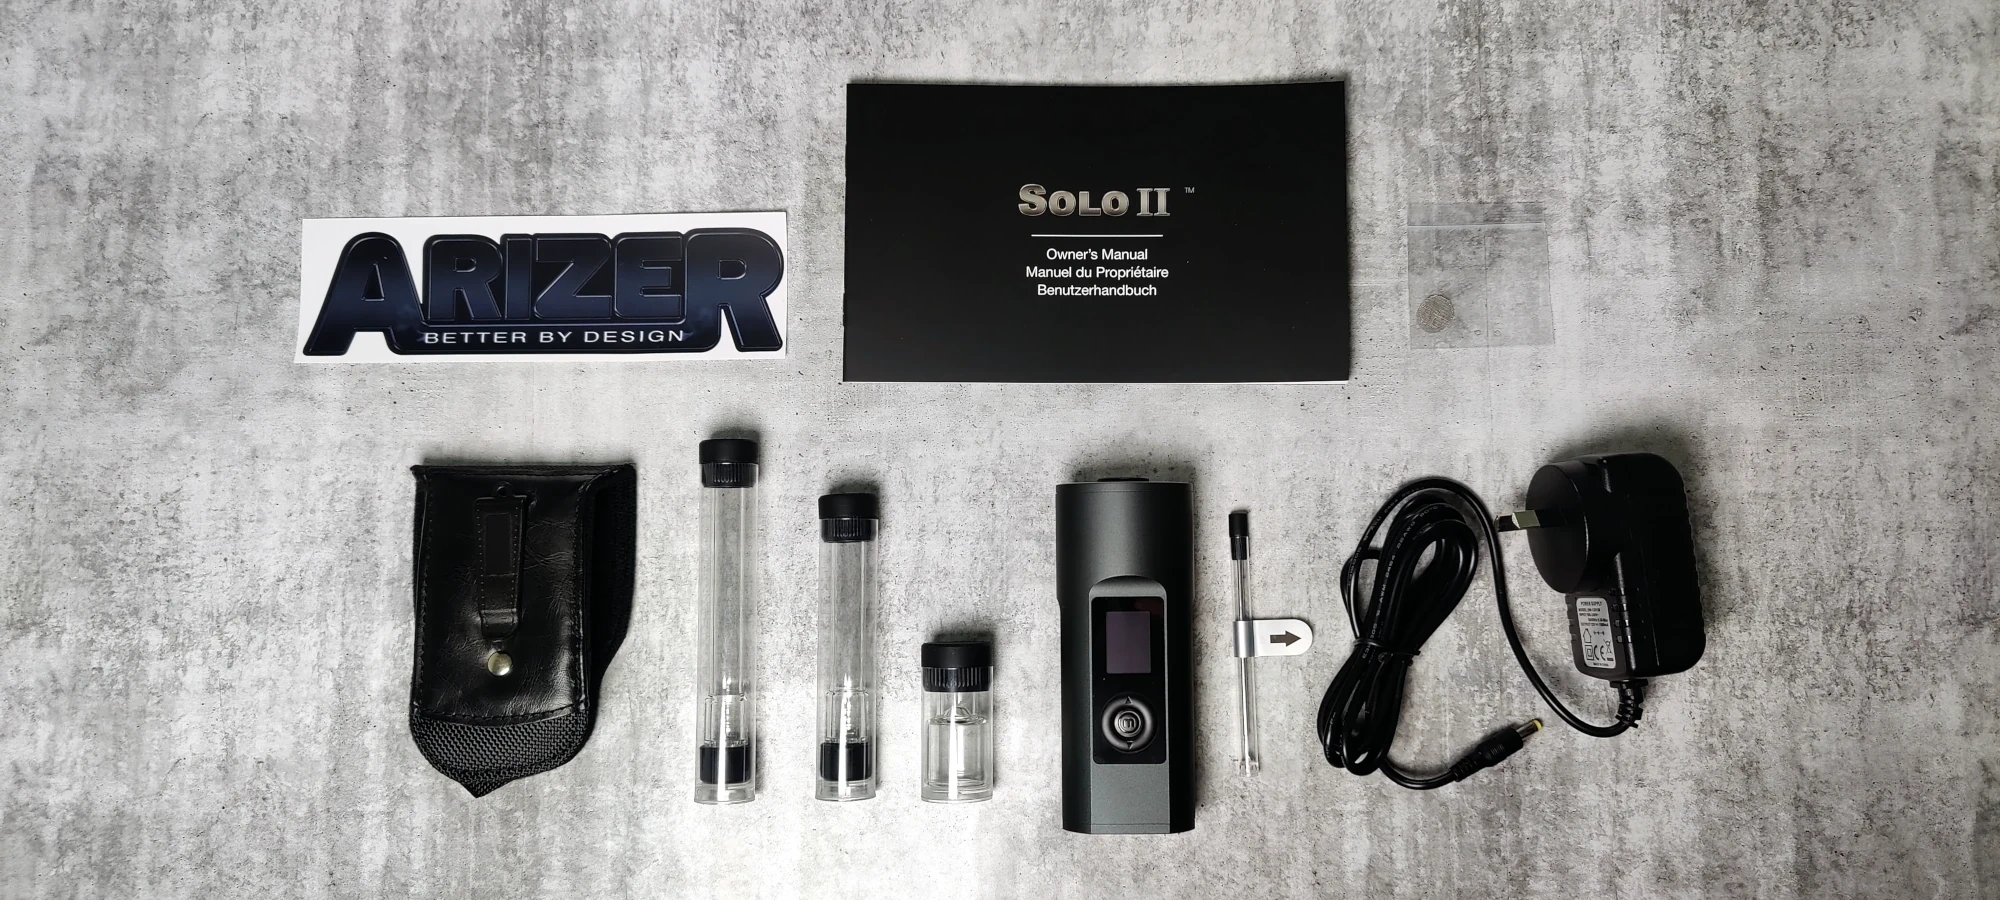 Arizer Solo II package contents